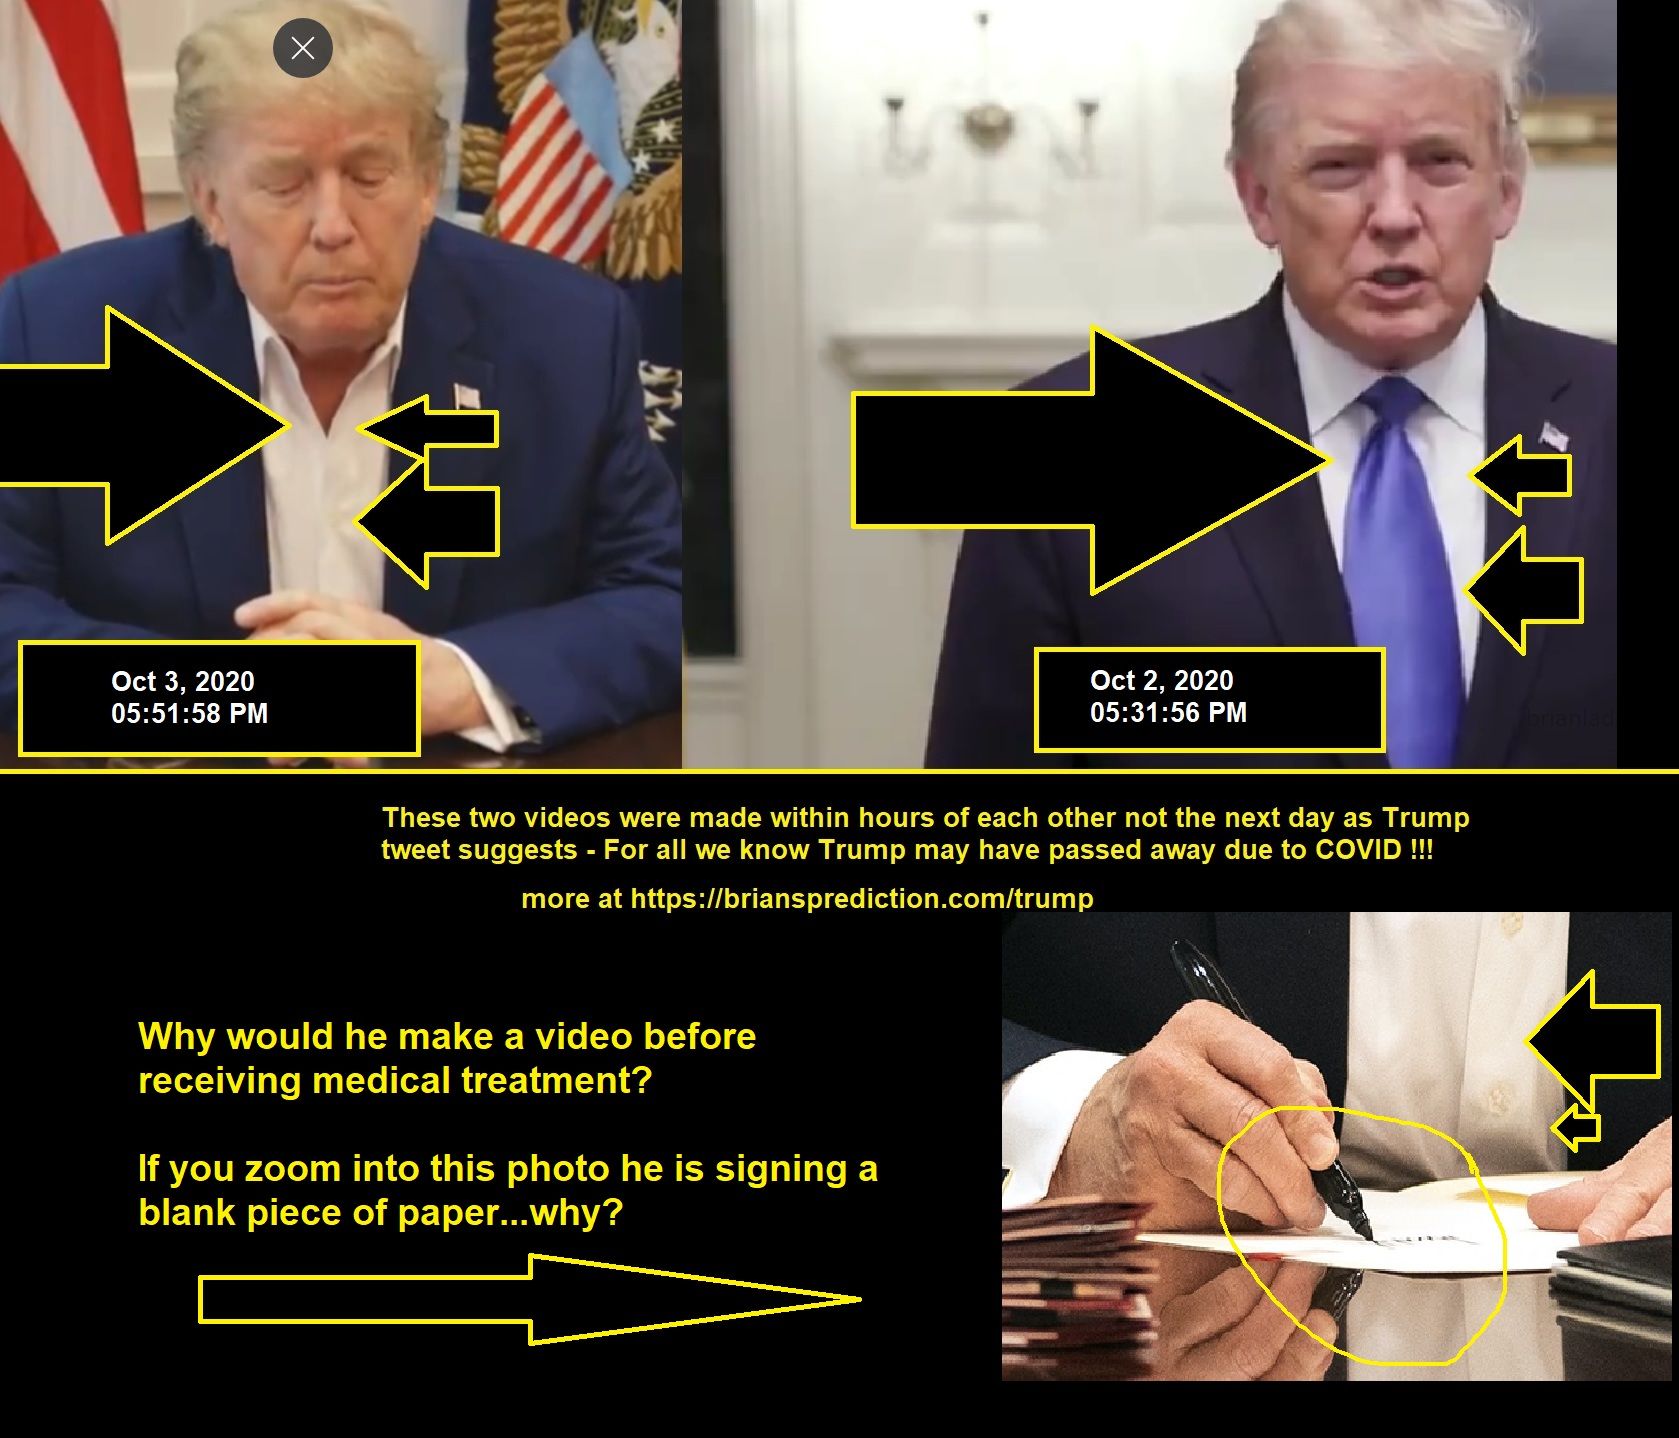 These Two Videos Were Made Within Hours Of Each Other Not The Next Day As Trump S Tweet Suggests For All We Know Trump M...
These Two Videos Were Made Within Hours Of Each Other Not The Next Day As Trump'S Tweet Suggests - For All We Know Trump May Have Passed Away Due To Covid  More At   https://briansprediction.com/Trump  Why Would He Make A Video Before Receiving Medical Treatment?  If You Zoom Into This Photo He Is Signing A Blank Piece Of Paper...Why?  Oct 3, 2020 05:51:58 Pm -   https://T.Co/Gvipuyttzg  Oct 3, 2020 12:46:48 Pm - Our Great Usa Wants & Needs Stimulus. Work Together And Get It Done. Thank You!  Oct 3, 2020 12:19:38 Pm - Doctors, Nurses And All At The Great Walter Reed Medical Center, And Others From Likewise Incredible Institutions Who Have Joined Them, Are Amazing!!!Tremendous Progress Has Been Made Over The Last 6 Months In Fighting This Plague. With Their Help, I Am Feeling Well!  Oct 2, 2020 10:31:34 Pm - Going Weli, I Think! Thank You To All. Love!!!  Oct 2, 2020 05:31:56 Pm -   https://T.Co/B4h105kvss  Oct 1, 2020 11:54:06 Pm - Tonight, @FLOTUS And I Tested Positive For Covid-19. We Will Begin Our Quarantine And Recovery Process Immediately. We Will Get Through This Together!  Oct 1, 2020 09:44:21 Pm - Hope Hicks, Who Has Been Working So Hard Without Even Taking A Small Break, Has Just Tested Positive For Covid 19. Terrible! The First Lady And I Are Waiting For Our Test Results. In The Meantime, We Will Begin Our Quarantine Process!  Oct 1, 2020 06:16:15 Pm - Rt @realDonaldTrump: Will Be Interviewed Tonight By @seanhannity At 9:00. Enjoy!@Foxnews  Oct 1, 2020 06:15:07 Pm -   https://T.Co/Kifqoazeuw  Oct 1, 2020 06:06:49 Pm -   https://T.Co/Vhnde0olav
